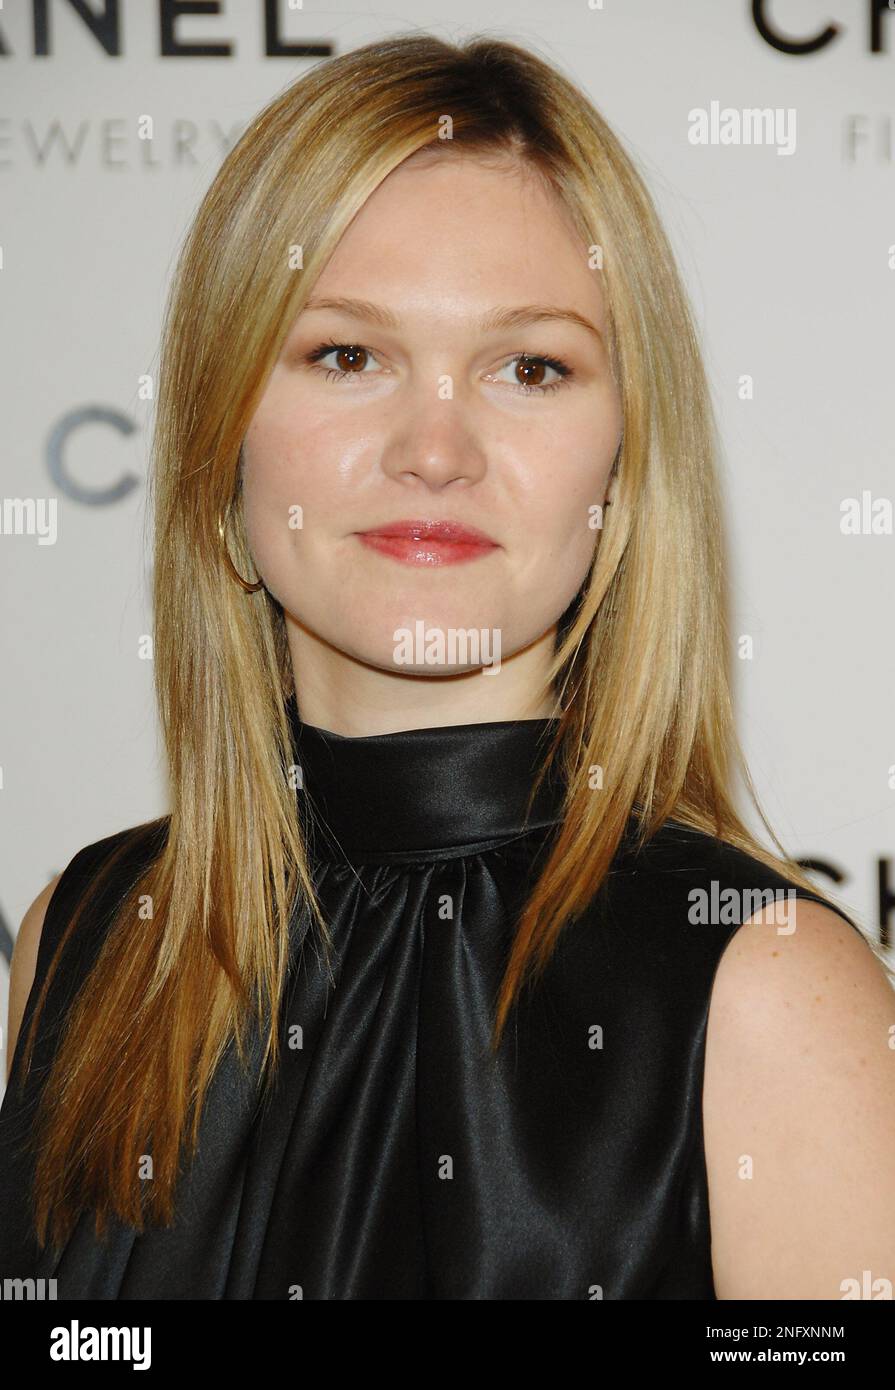 Actress Julia Stiles attends the Chanel "A Night of Diamonds" dinner at The  Plaza, Wednesday, Jan. 16, 2008 in New York. (AP Photo/Evan Agostini Stock  Photo - Alamy